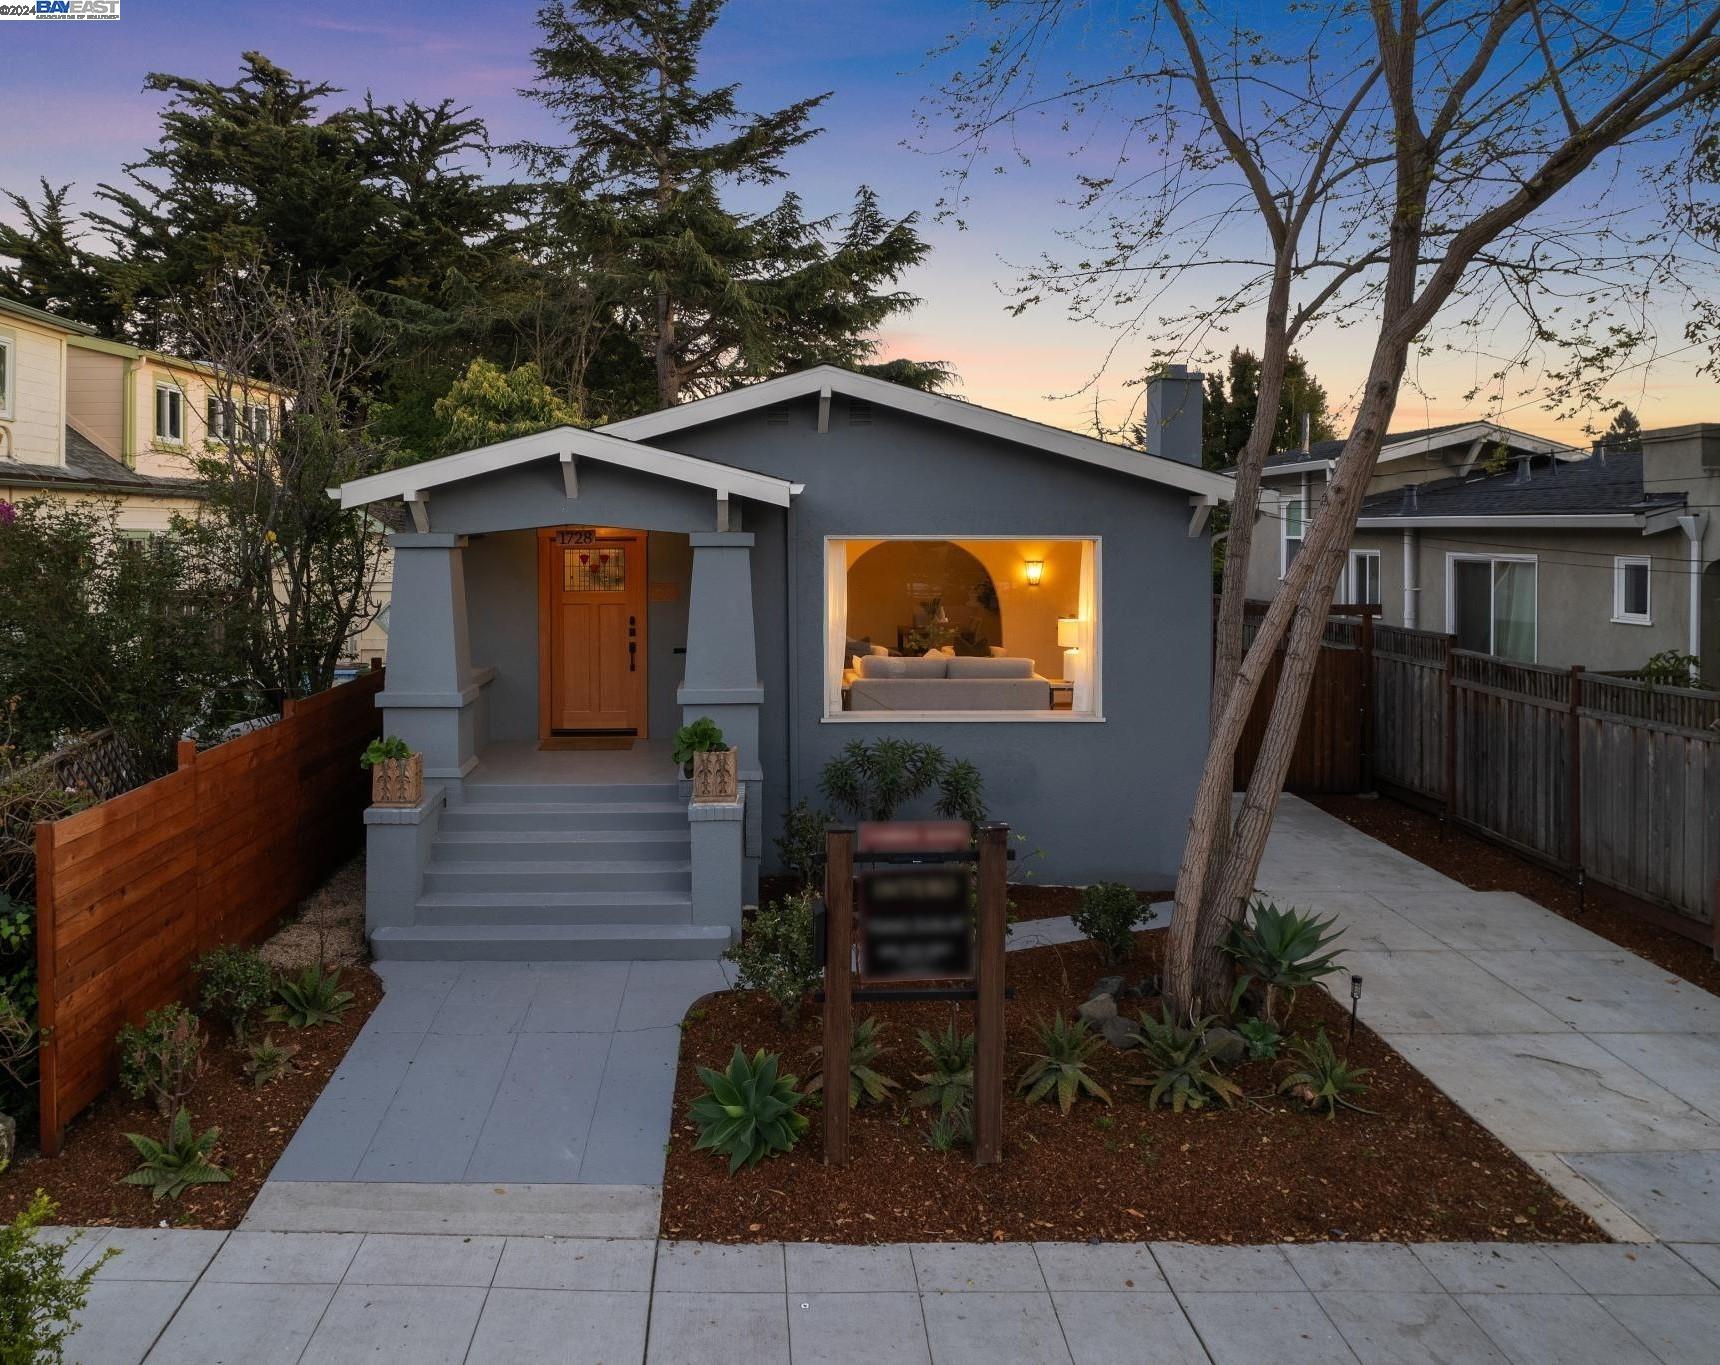 Nestled in the heart of Berkeley, this charming 1920s bungalow merges timeless elegance w/modern amenities. Situated on an amazing lot, this property offers 2bed/1ba, living room, formal dining, kitchen, laundry, storage room in basement, a large driveway for multiple parking & security gate. Upon entering, you'll be greeted by a formal entryway, large living room w/abundant natural light. Beautiful hardwood flooring. Remodeled kitchen & bathroom. The rear bedroom, elevated by the split-level design, offers tranquil garden views & a unique charm. Below, a partial basement provides additional storage space. Step outside to the sunny spacious backyard, perfect for entertaining. Drought-tolerant plants along w/fruit trees & vegetable beds.  State of the art energy efficient heat pump w/Central Heat/AC. Newer windows/doors, roof, interior paint, retrofit, sewer lateral compliance, gate & fences. With the expansive backyard, there is plenty of room to expand the main home & build an ADU. The convenient location of this home is outstanding. Walking distance to Berkeley Bowl, library, tool lending library, tennis courts & new playground at Grove park. Zoned for Willard Middle School. Enjoy easy access to public transport, Ashby BART (0.6 miles) & Downtown Berkeley, restaurants & cafes.